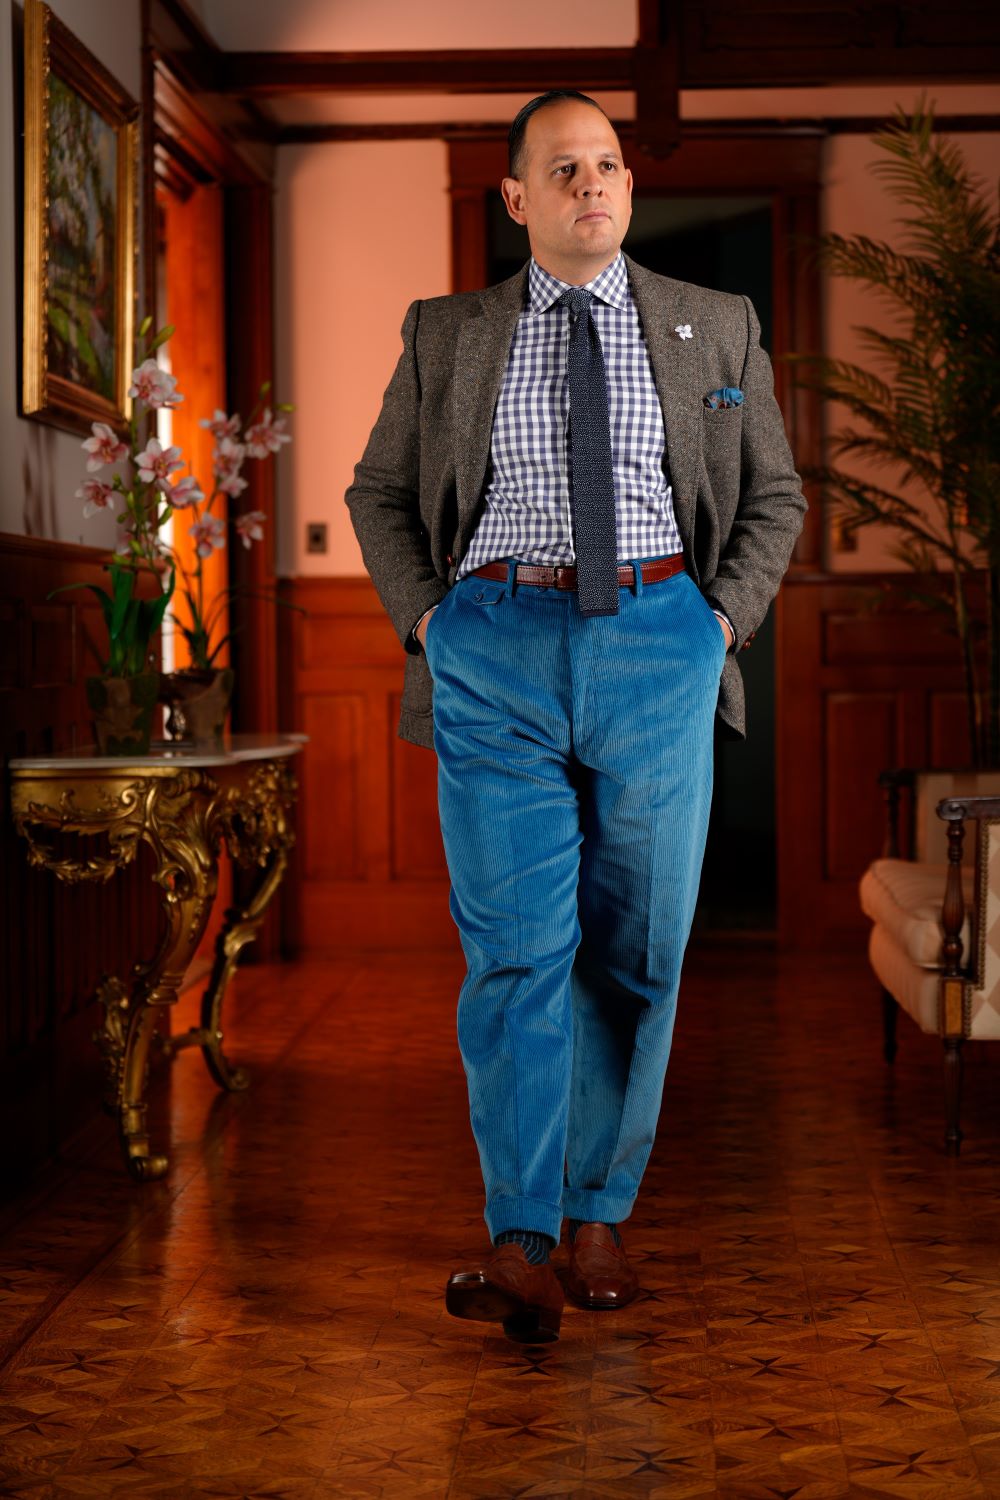 Raphael wearing a gray sport coat paired with an azure blue colored corduroy